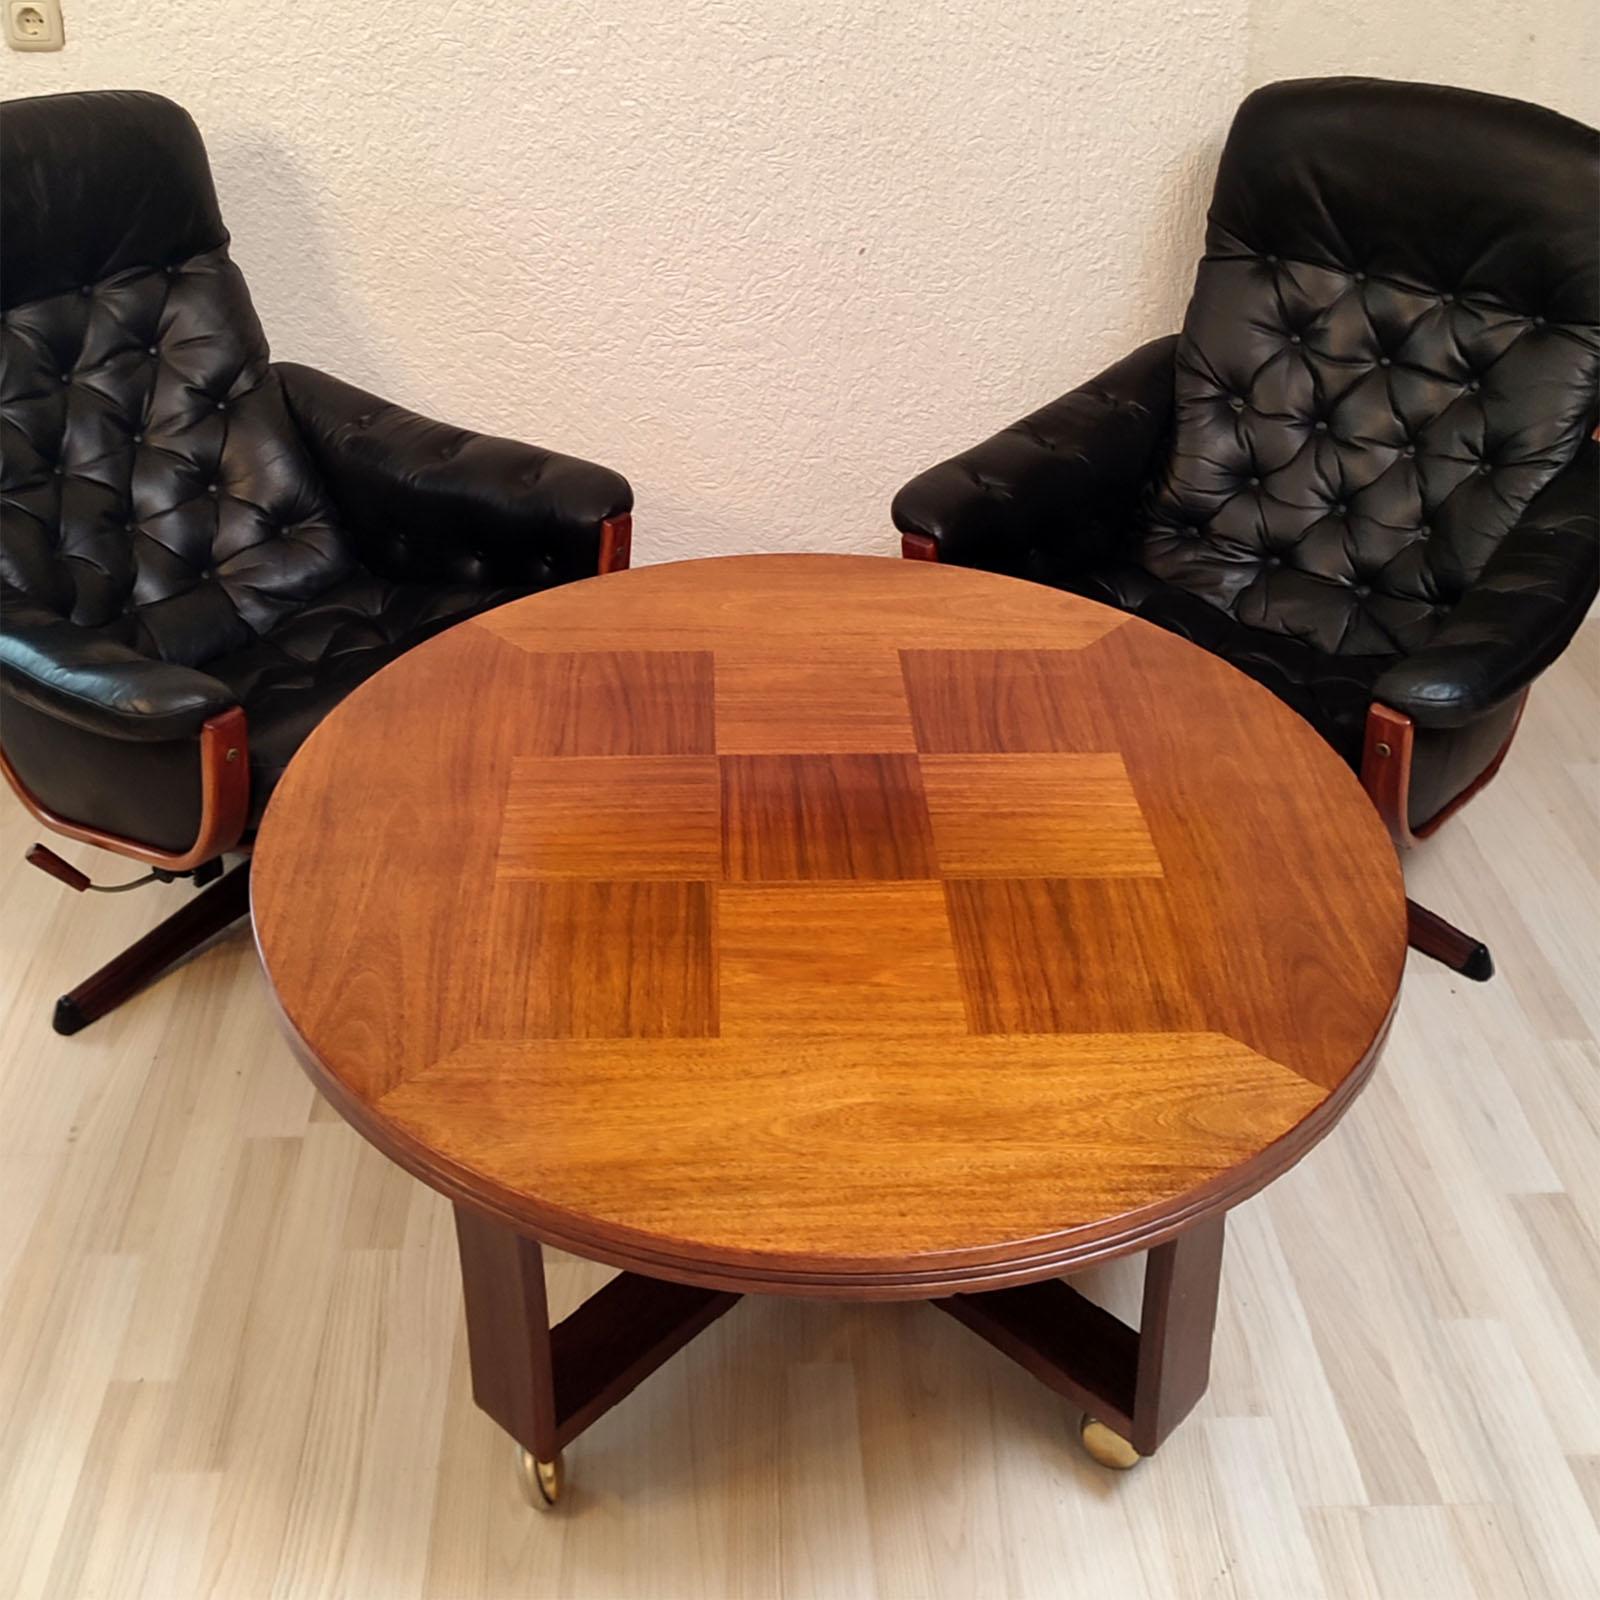 Parquetry Mid-Century Modern Round Coffee Sofa Table on Castors, Sweden 1970s For Sale